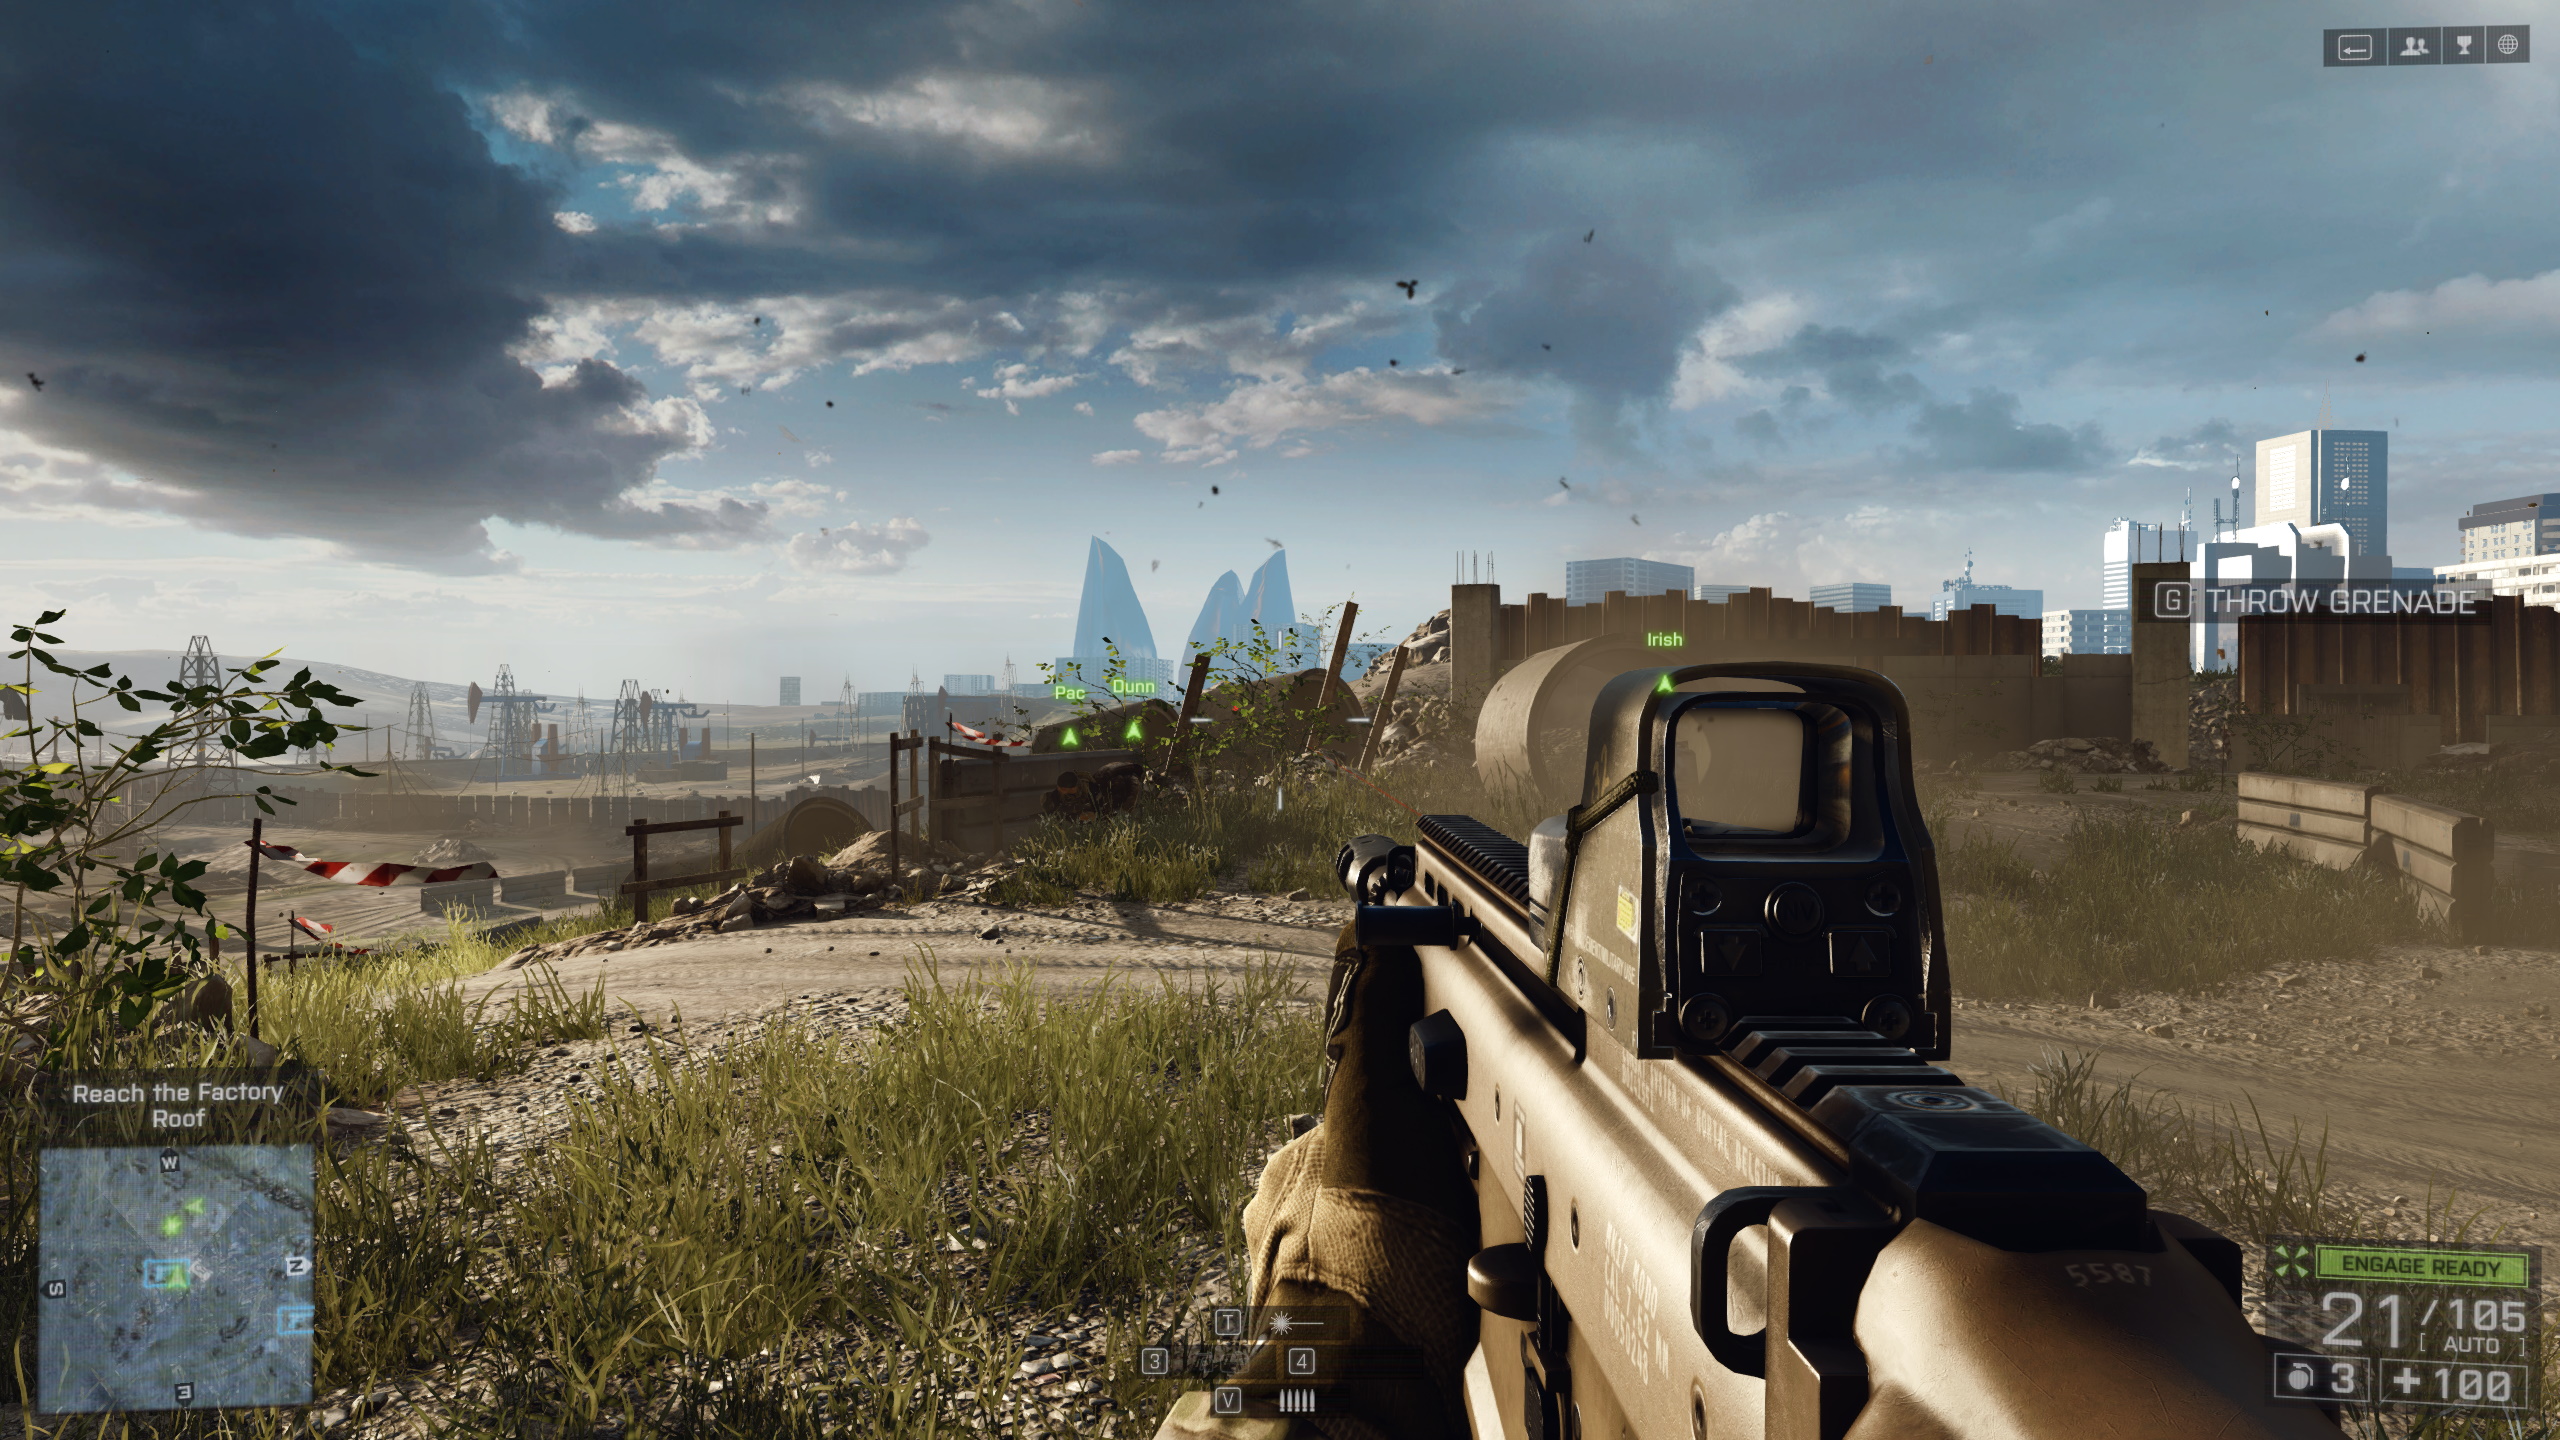 Battlefield 4™ System Requirements — Can I Run Battlefield 4™ on My PC?